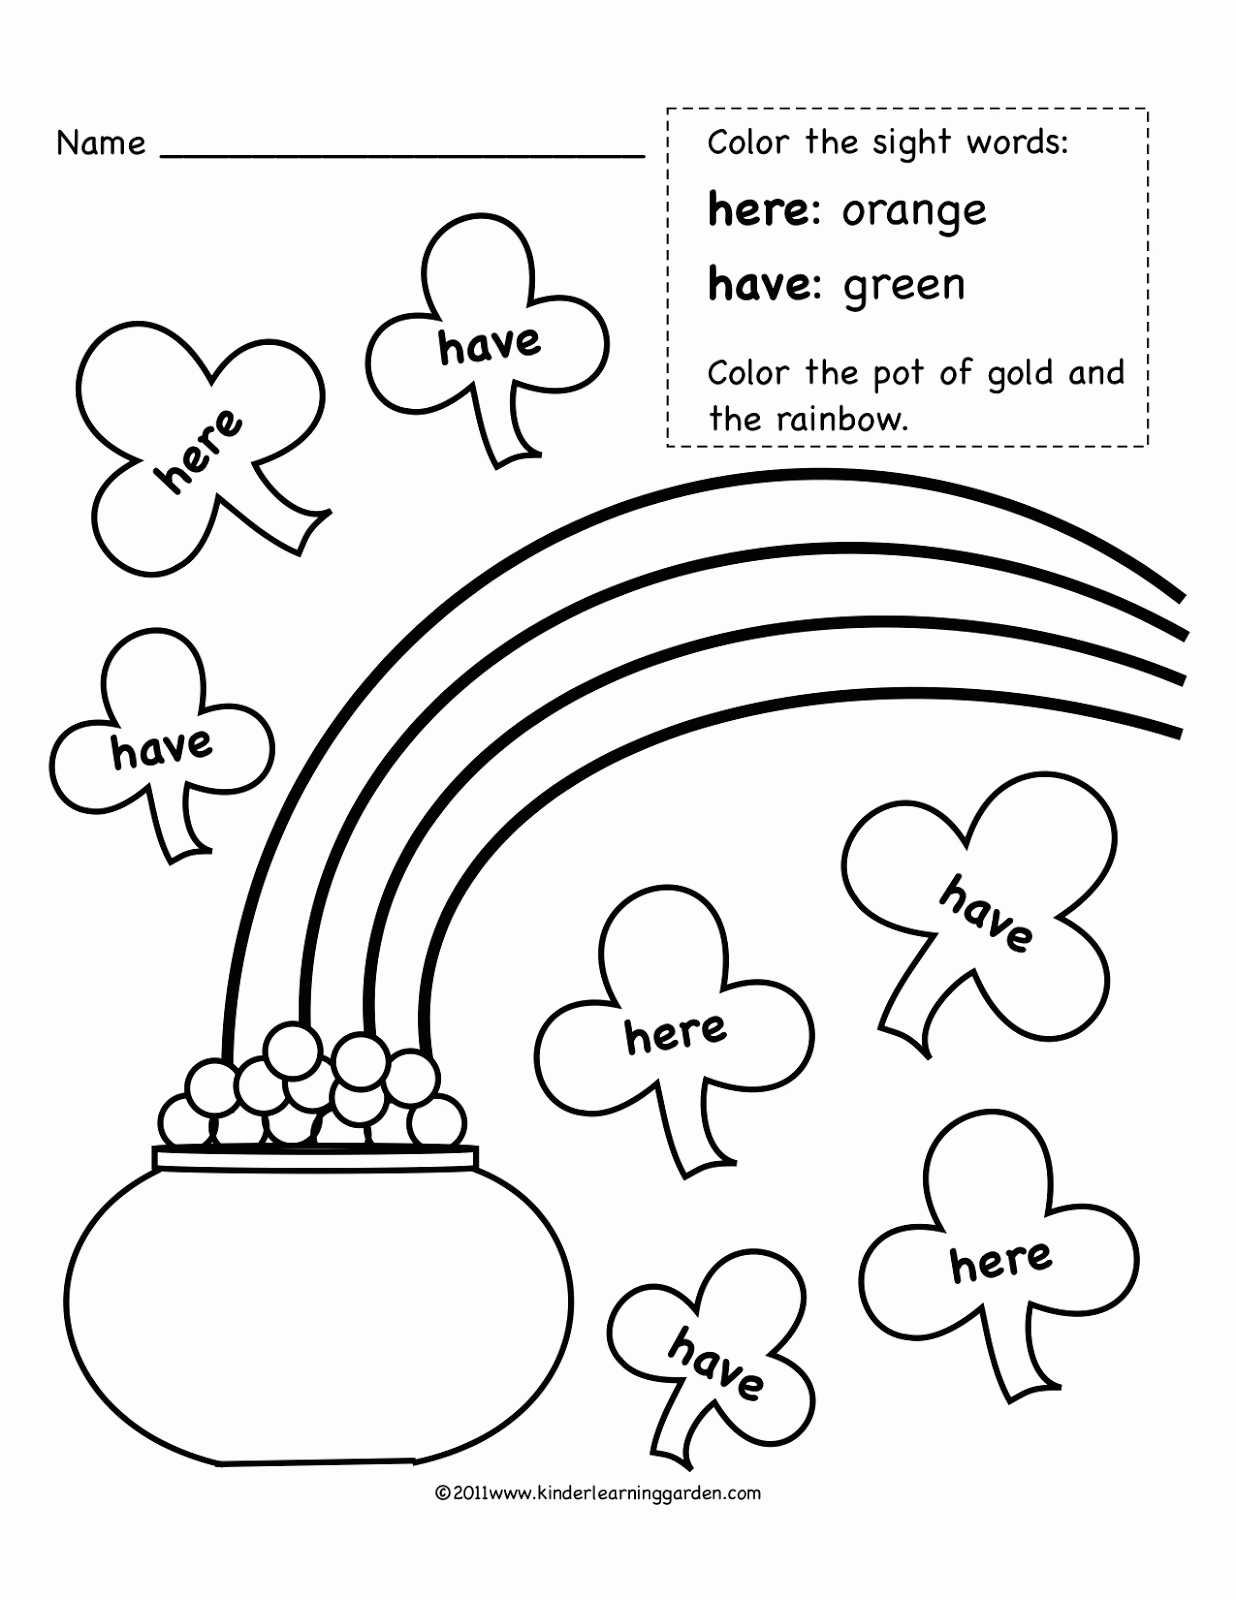 Download Sight Words Coloring Pages - Coloring Home